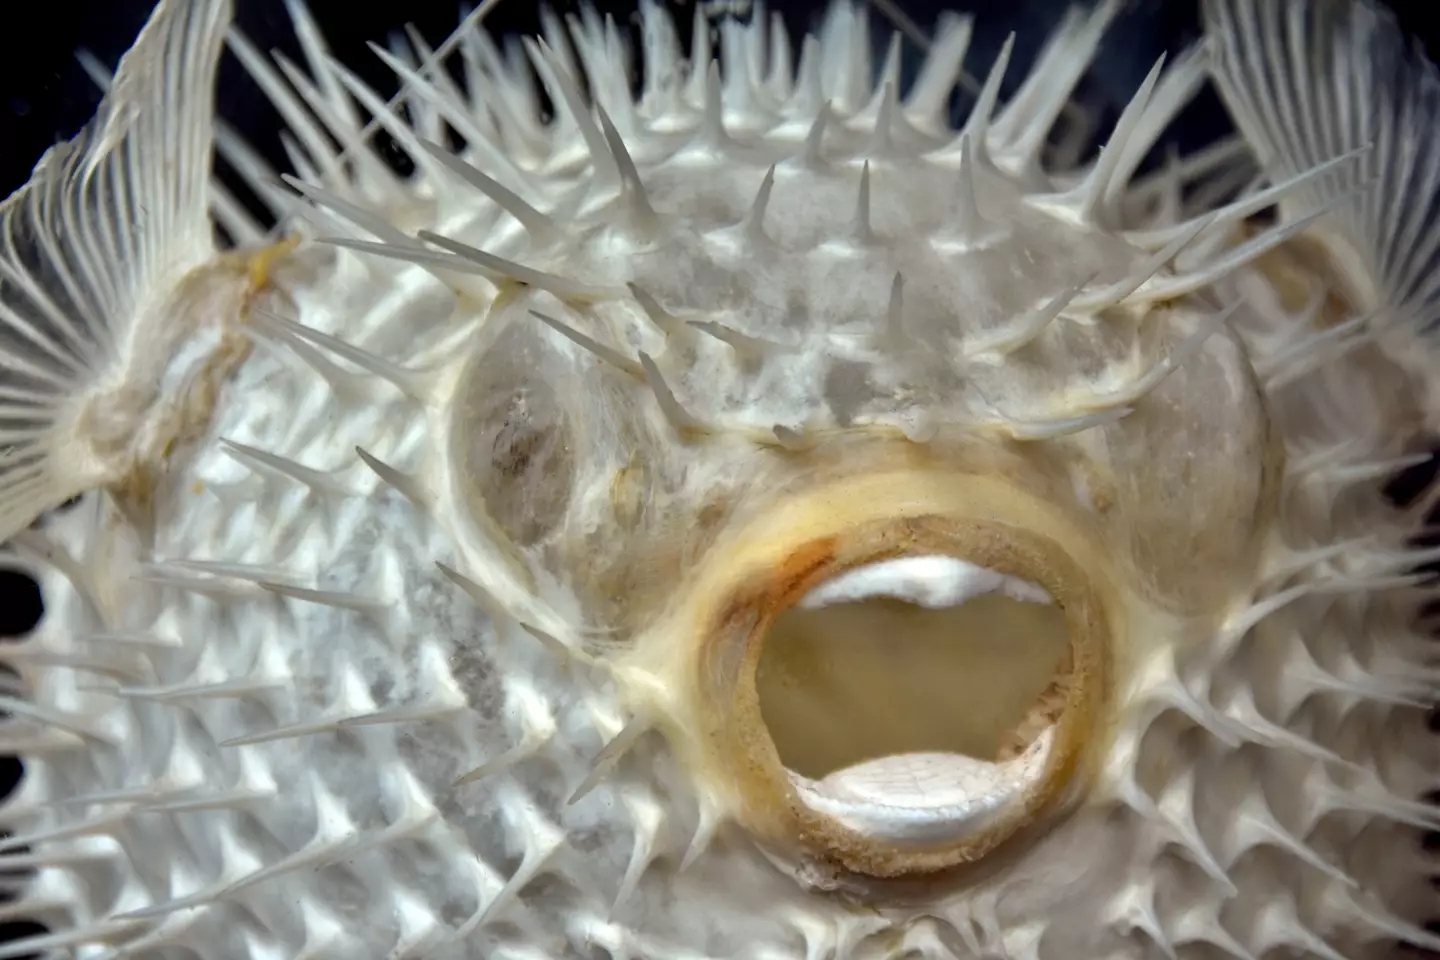 Fugu contains tetrodotoxin which is said to be 10,000 times more poisonous than cyanide.